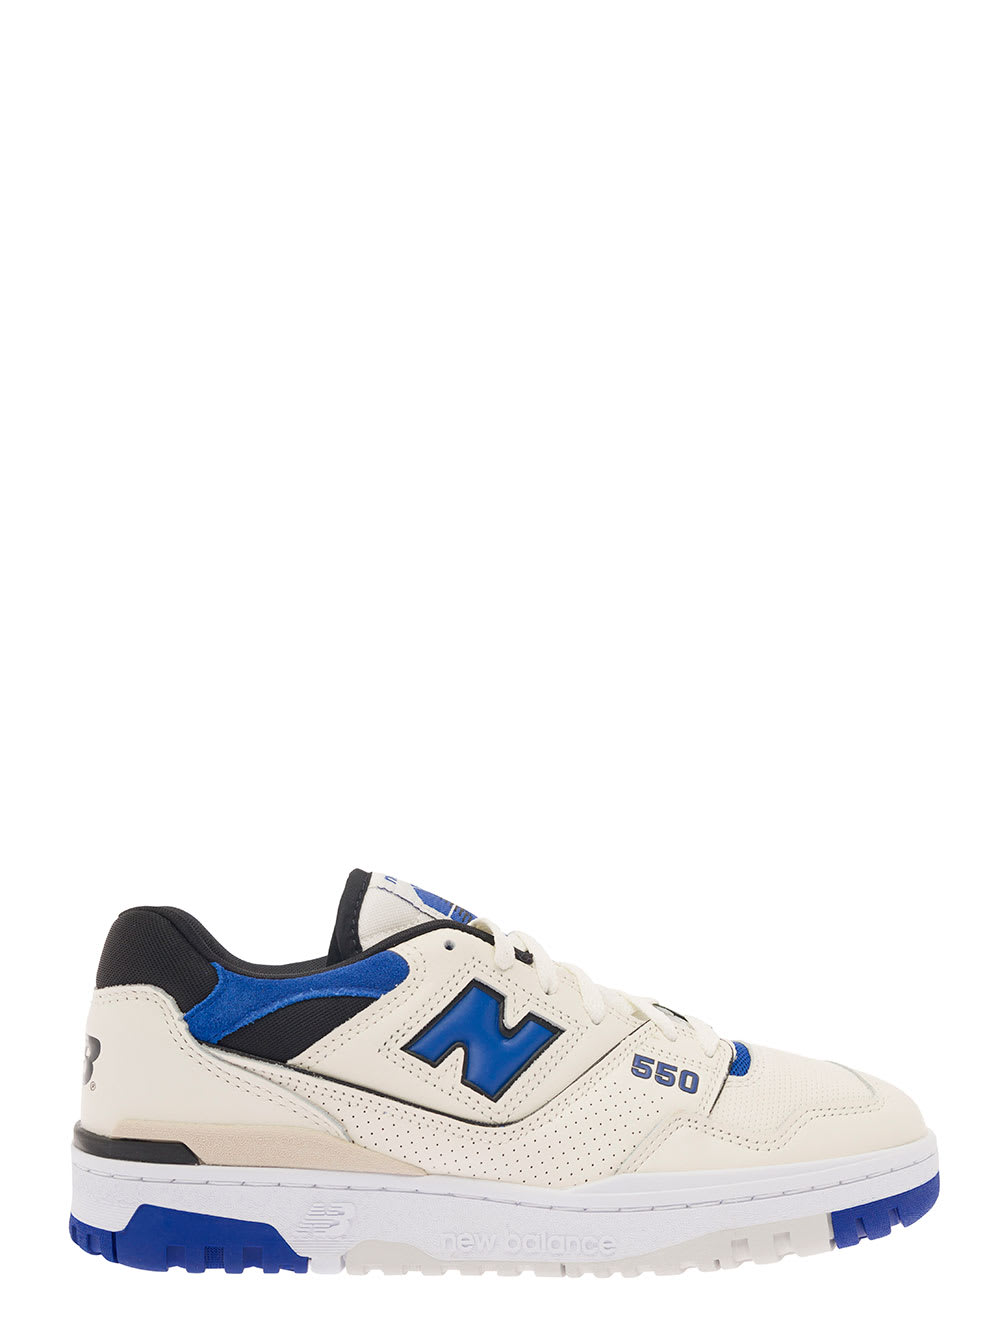 New Balance 550 White And Blue Low Top Sneakers With Logo And Contrasting Details In Leather Man